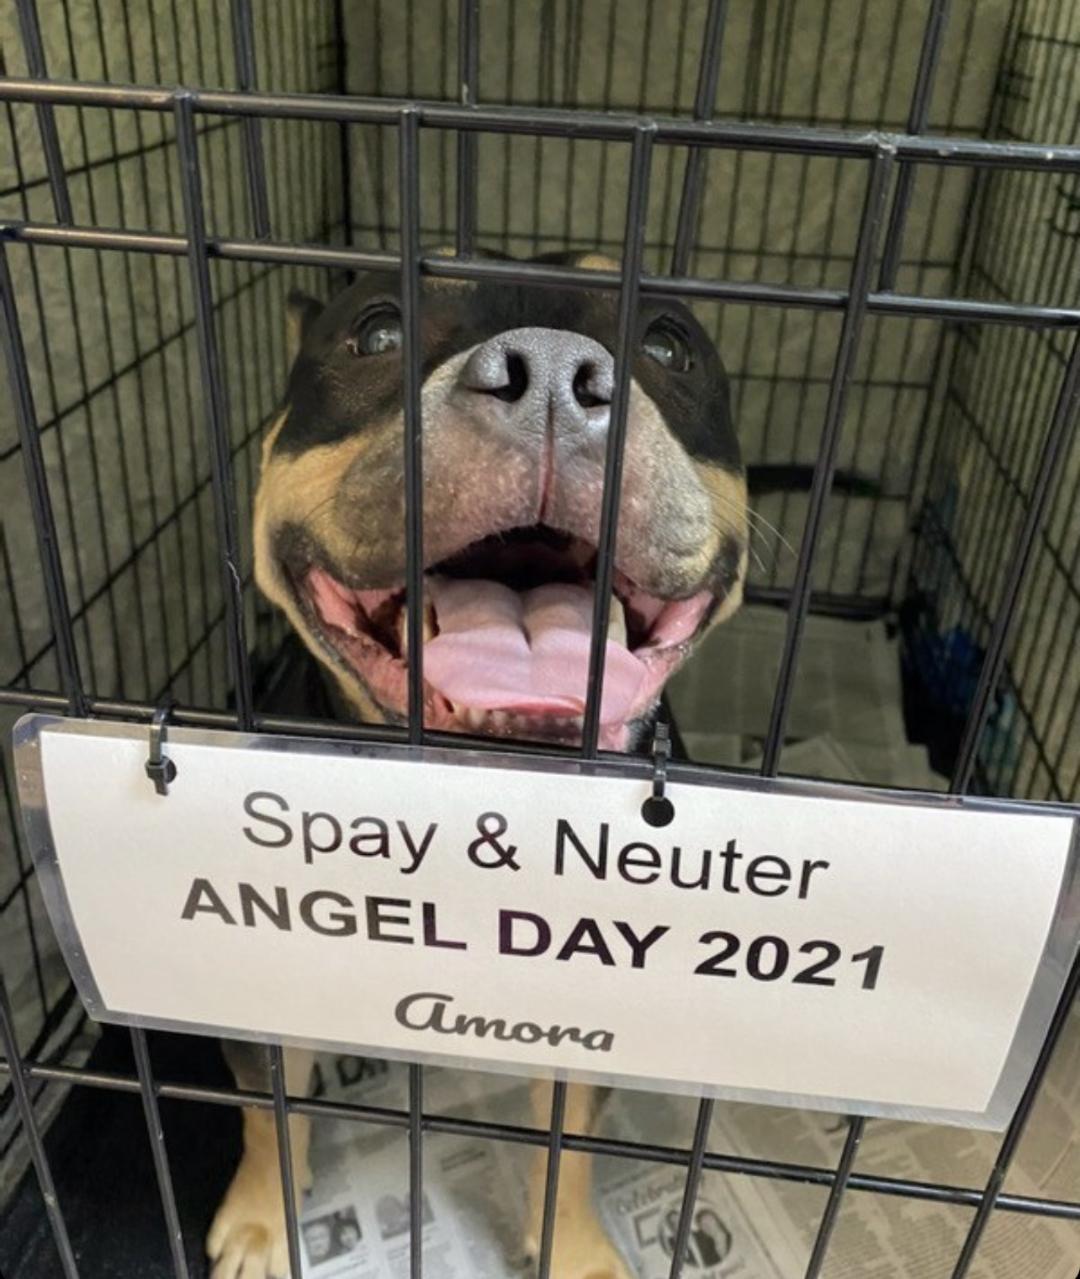 Spay & Neuter ANGEL DAY NEW YORK day 2 HAPPENING NOW!!